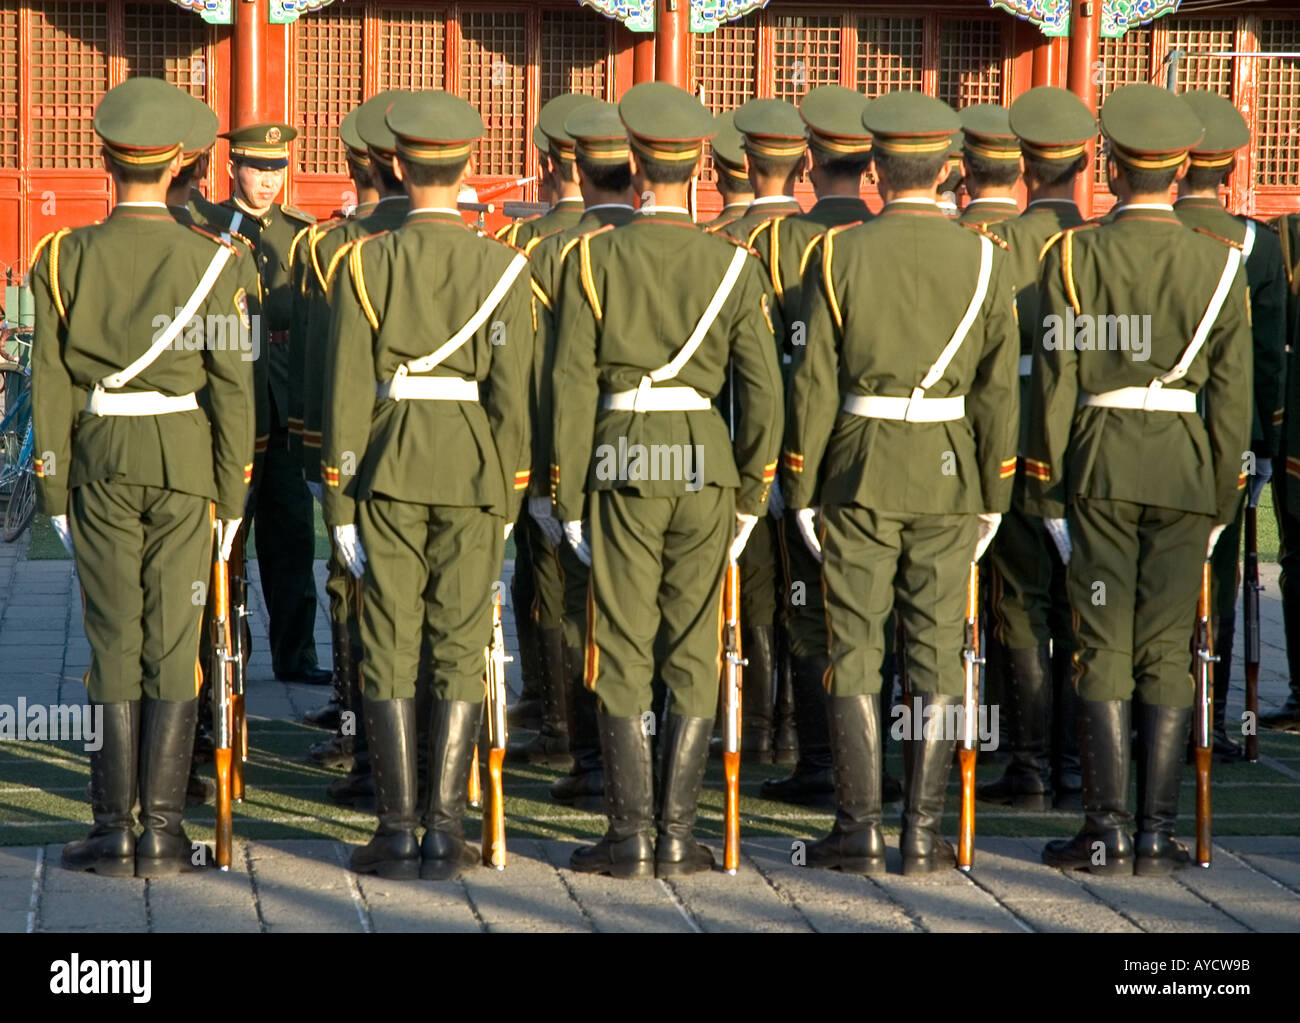 Soldiers practising military exercises near Beijing’s Forbidden City and Tiananmen square, China Stock Photo